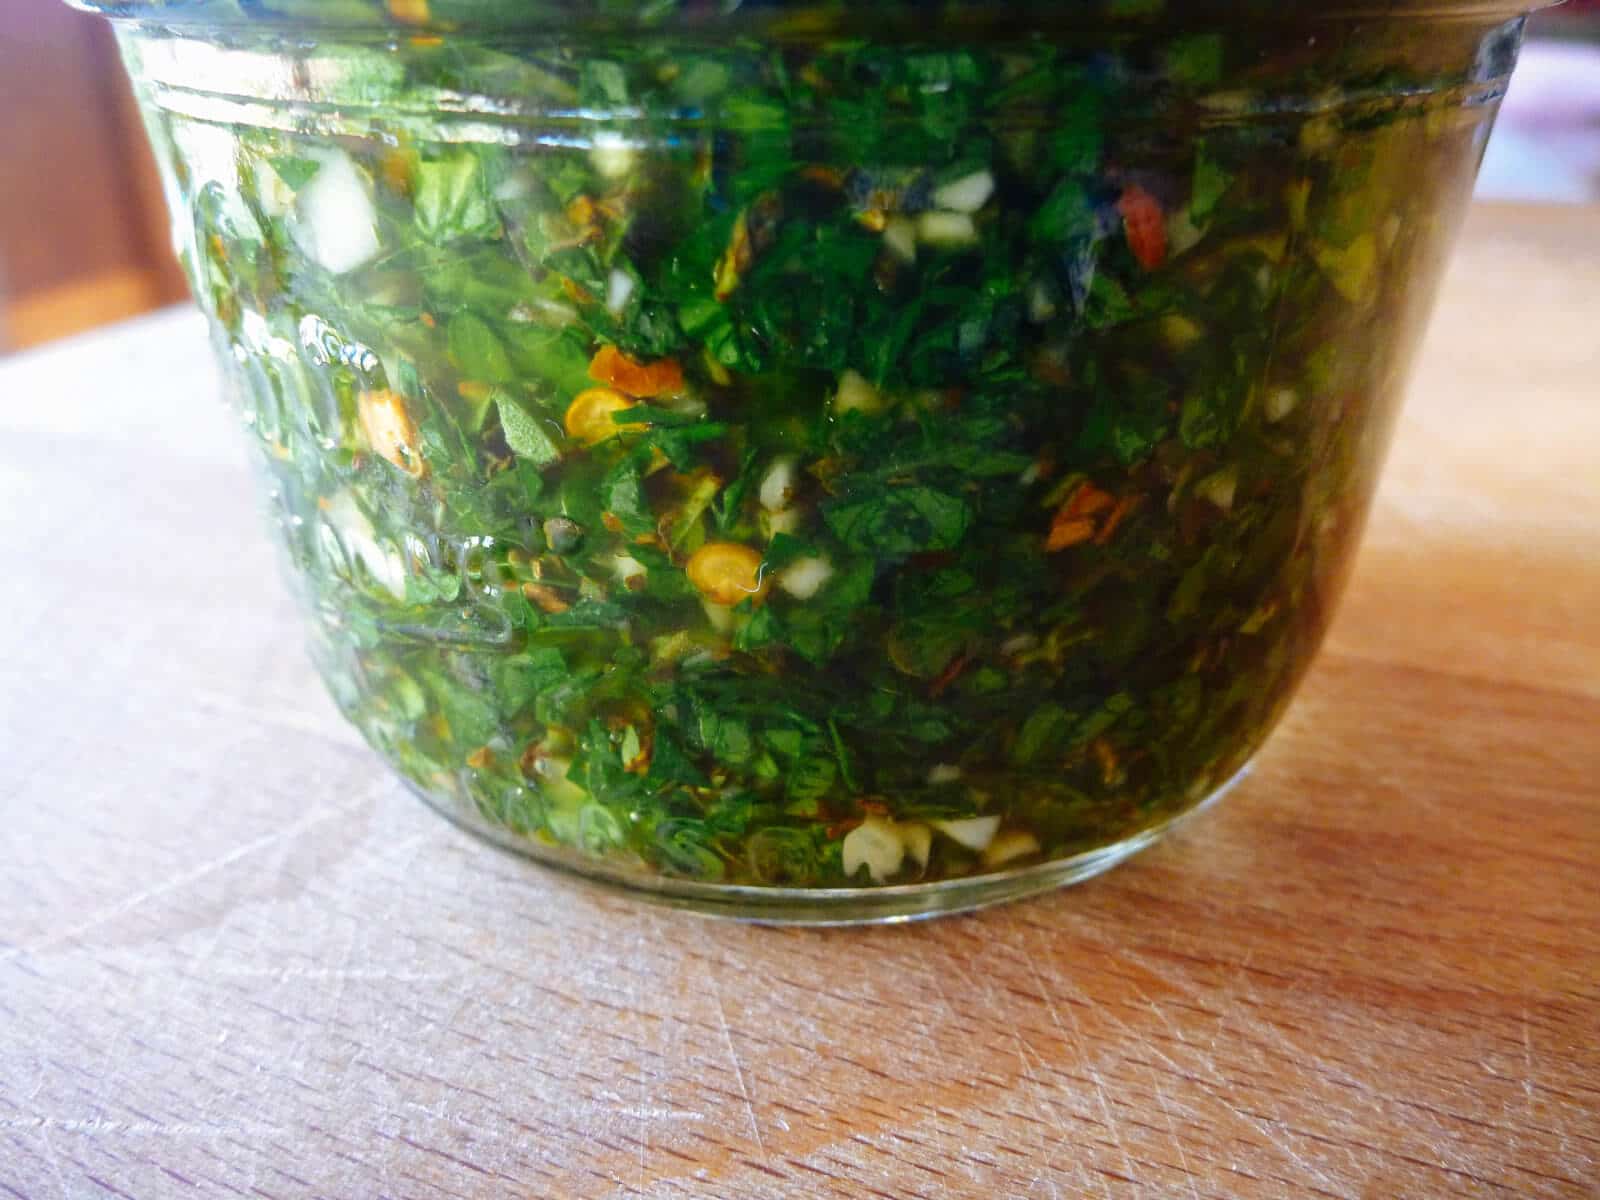 The best chimichurri is a deep army green, so don't be afraid to let the sauce age